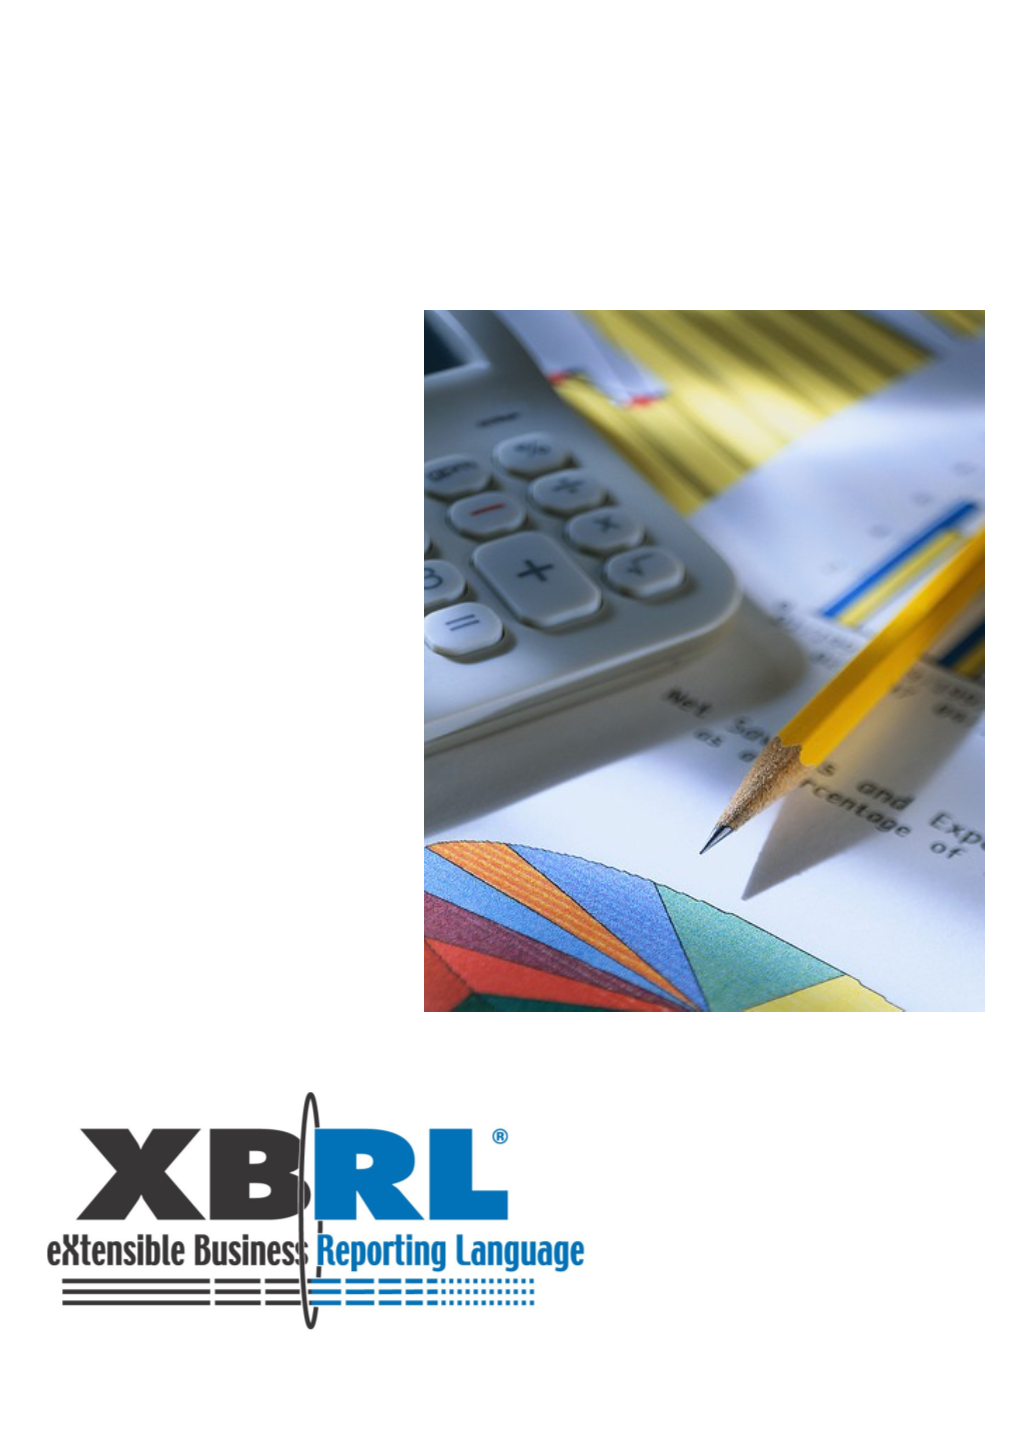 Adoption and Acceptance of XBRL by Small and Medium-Sized Accounting Organizations in The